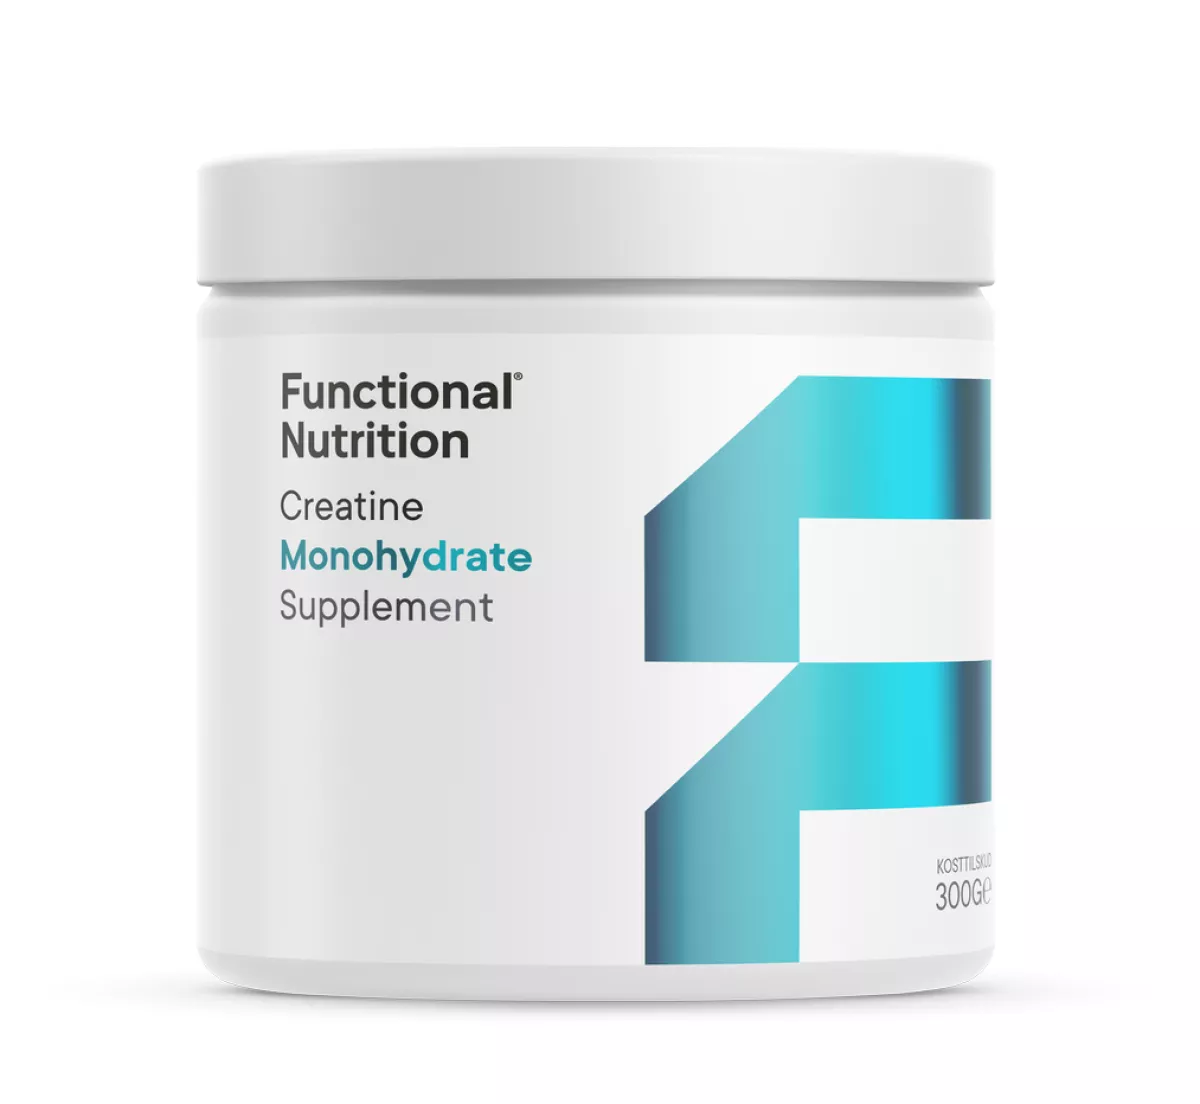 #1 - Functional Nutrition Kreatin Monohydrate (300g)